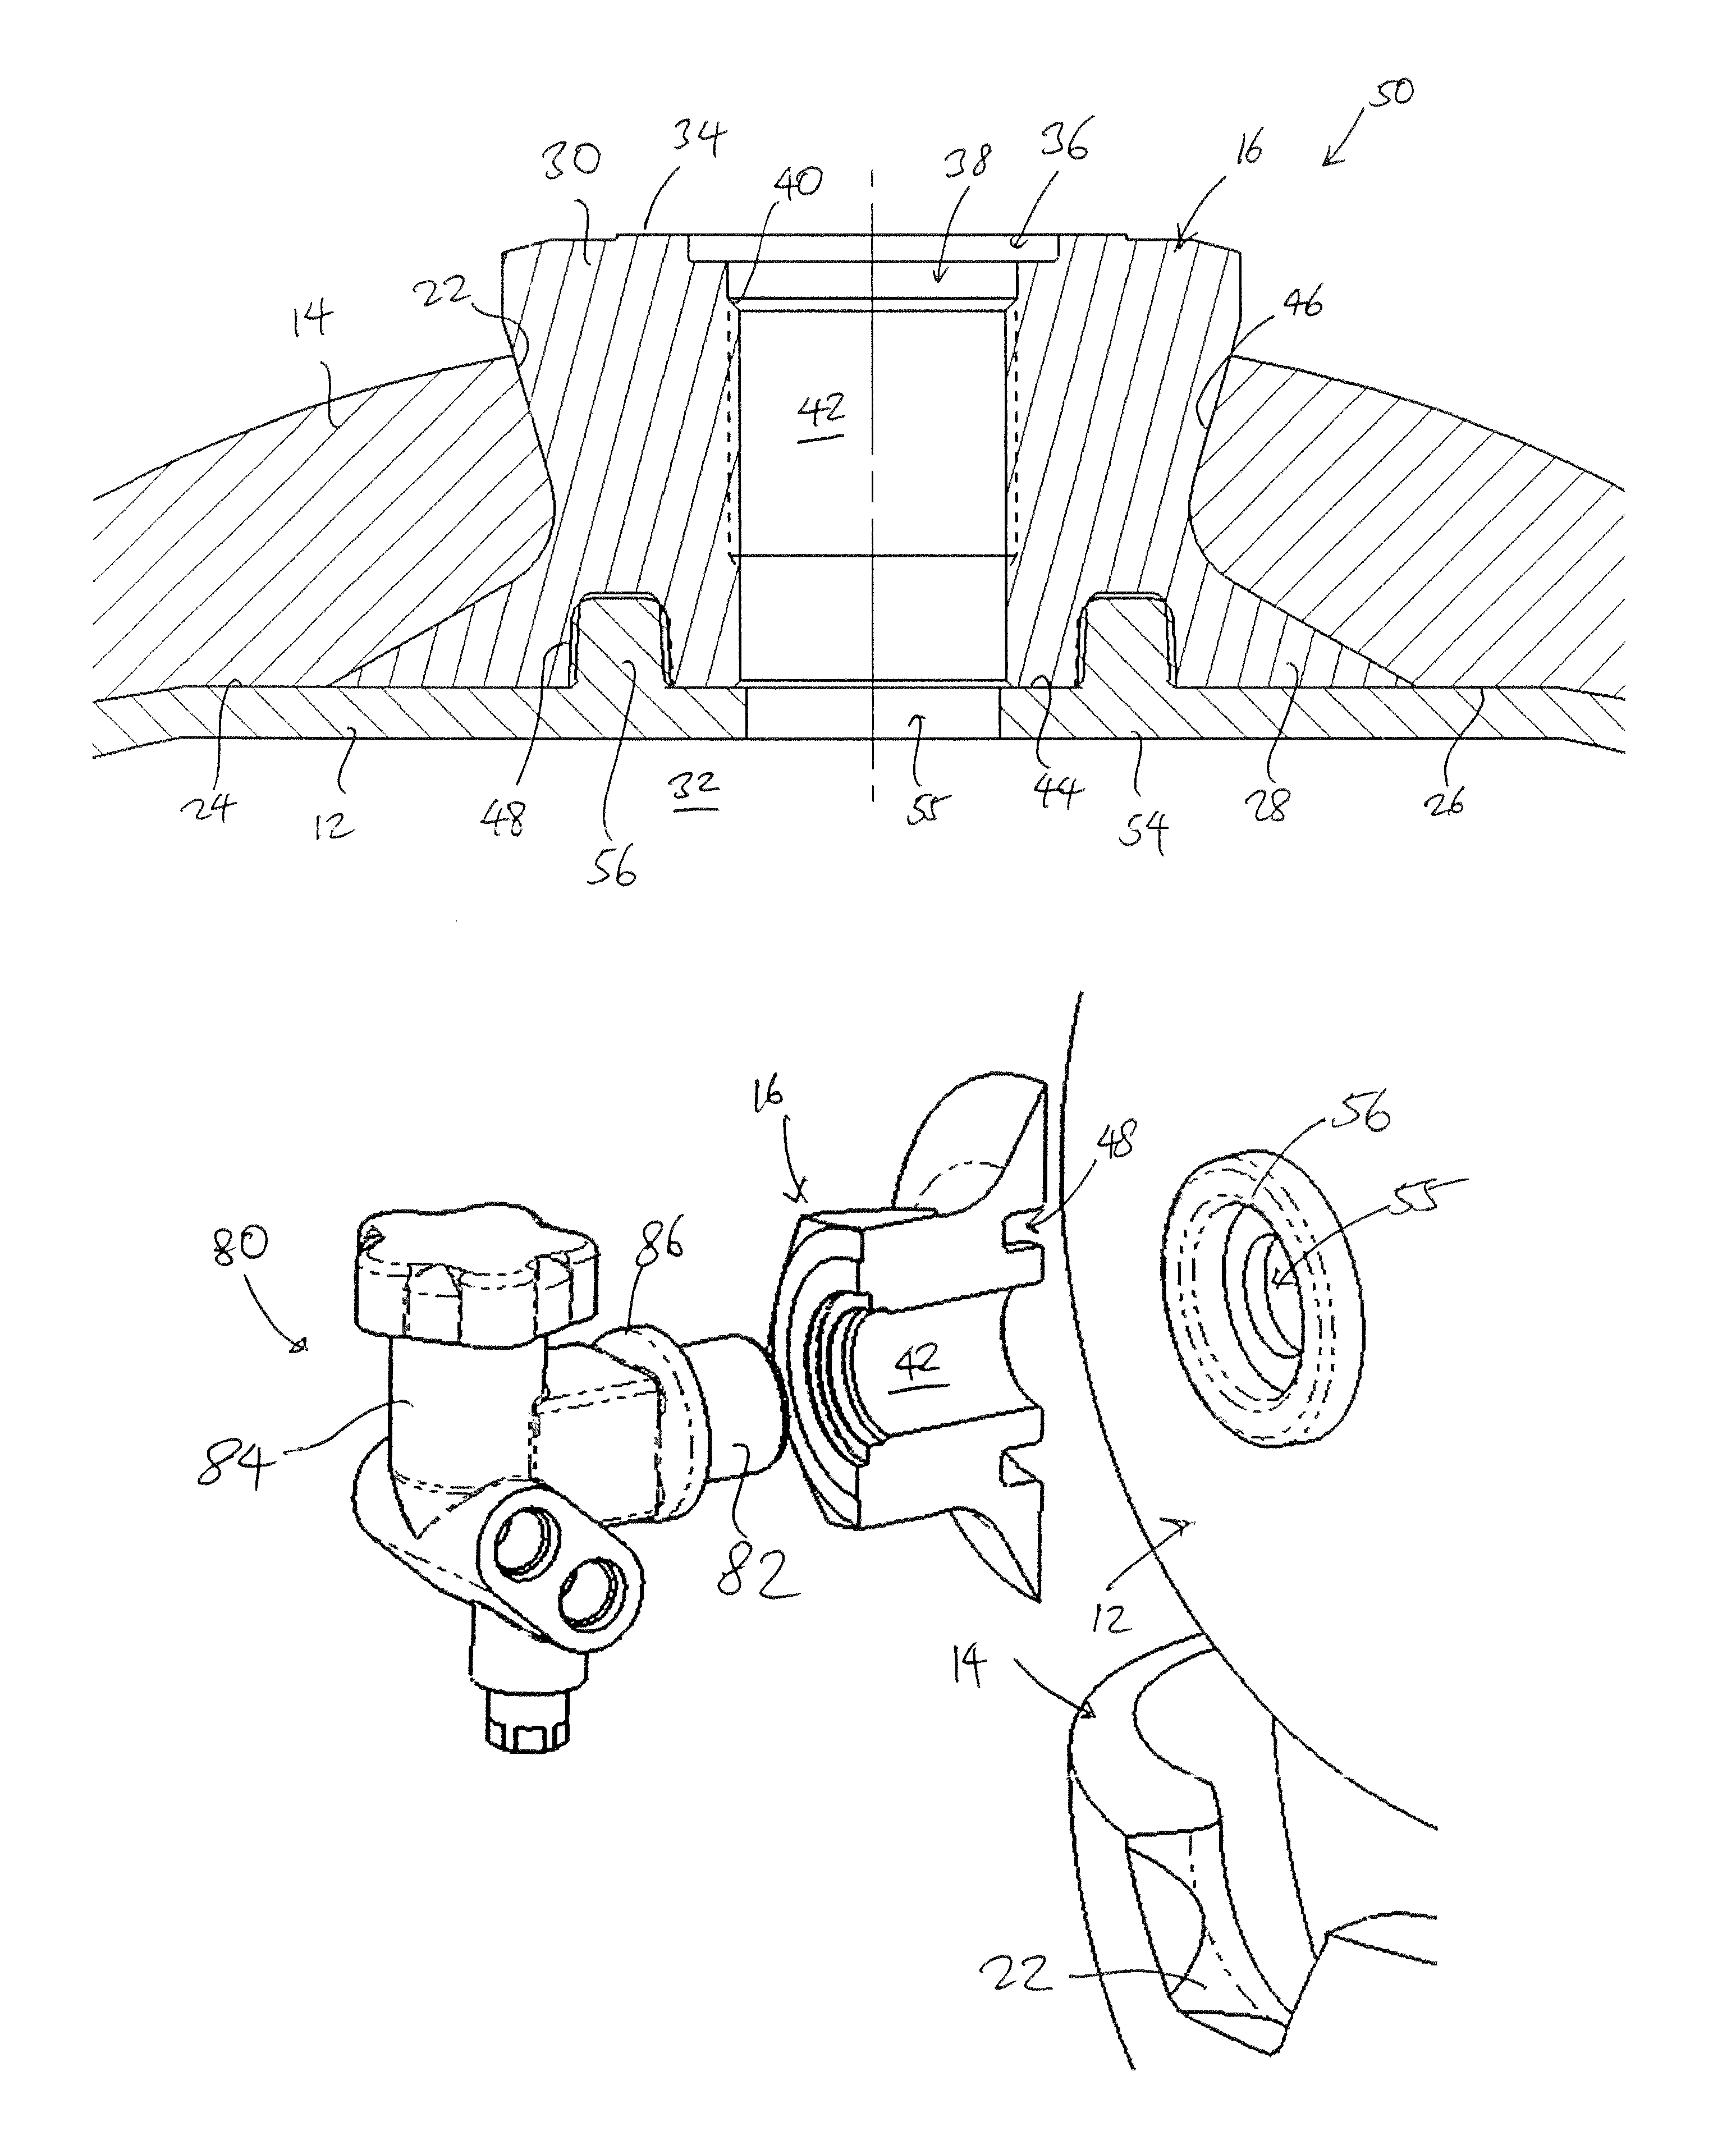 Adapterless closure assembly for composite pressure vessels